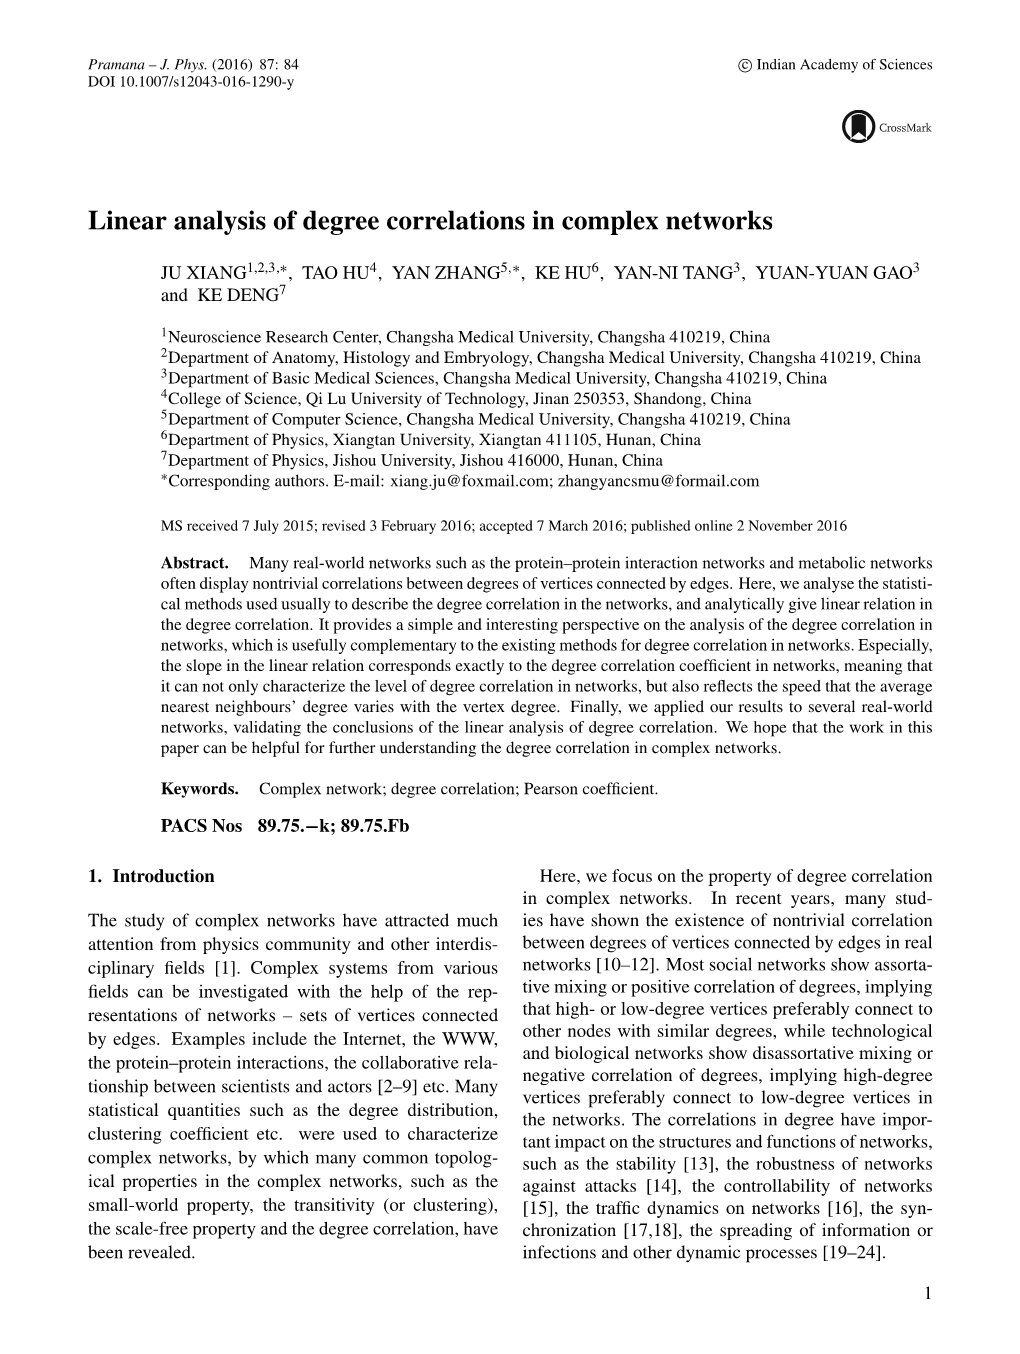 Linear Analysis of Degree Correlations in Complex Networks